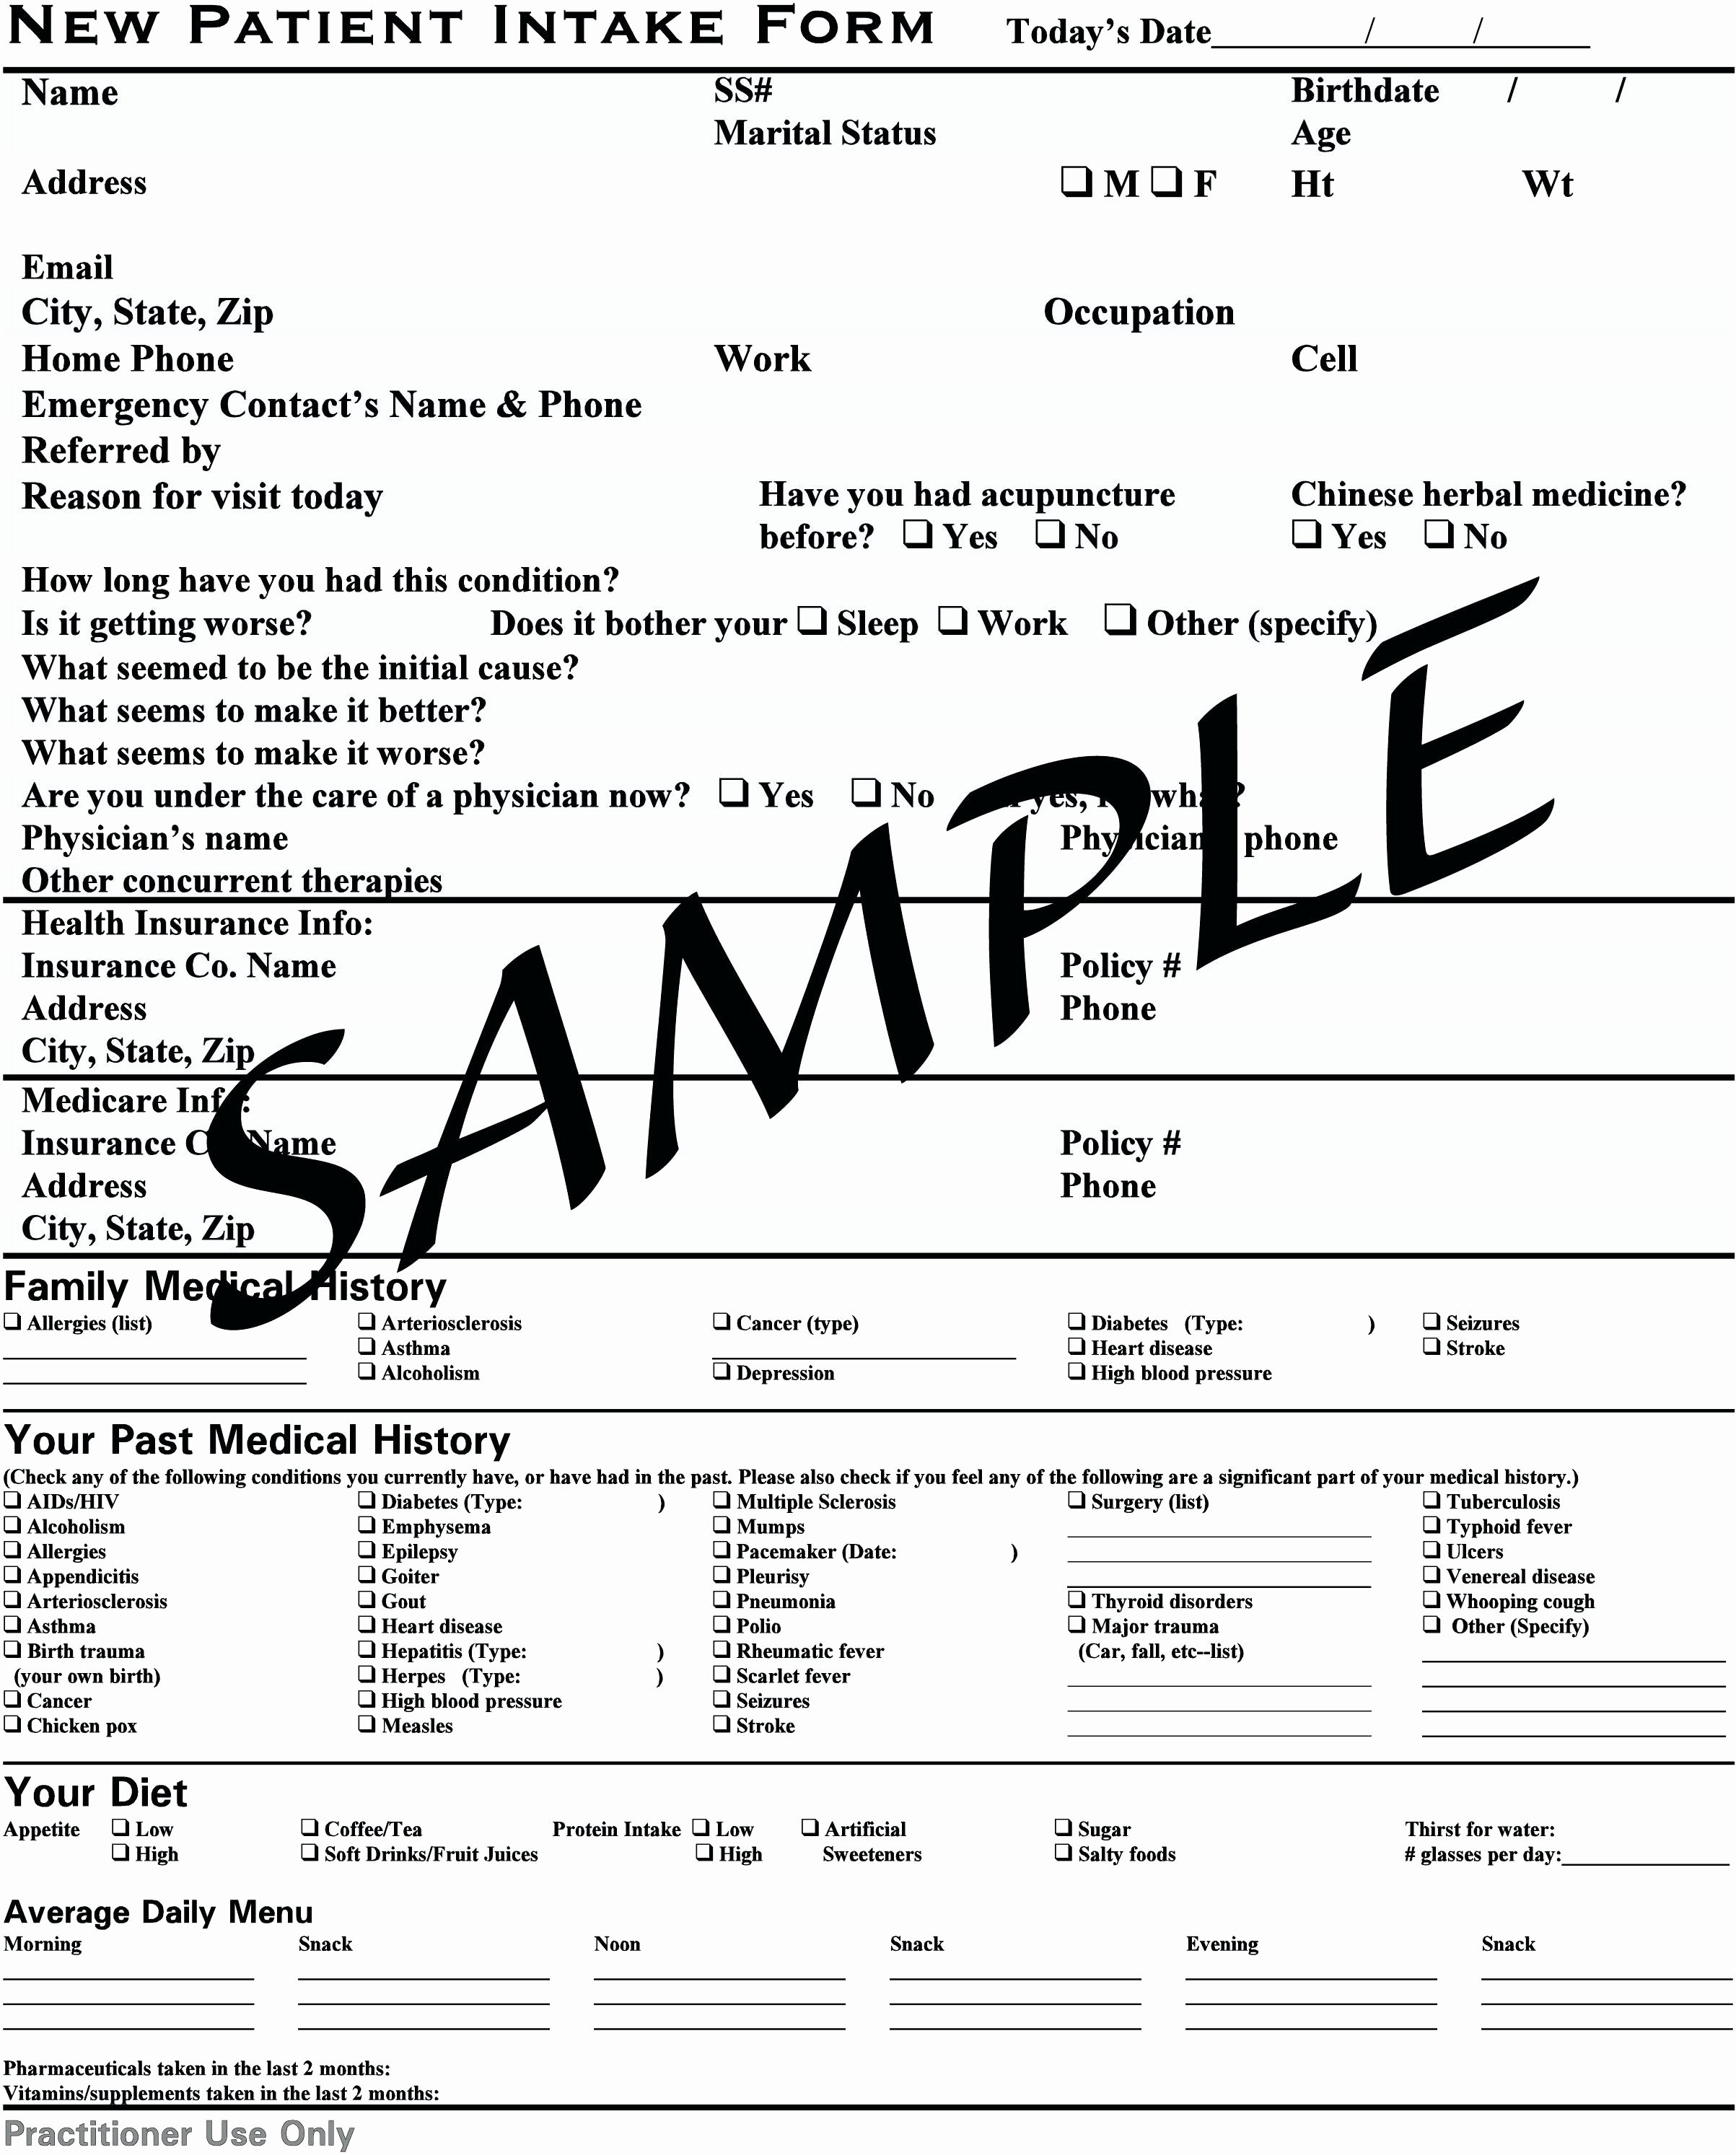 Patient Intake form Template Awesome Patient Intake form Intake form 3 Client Intake form